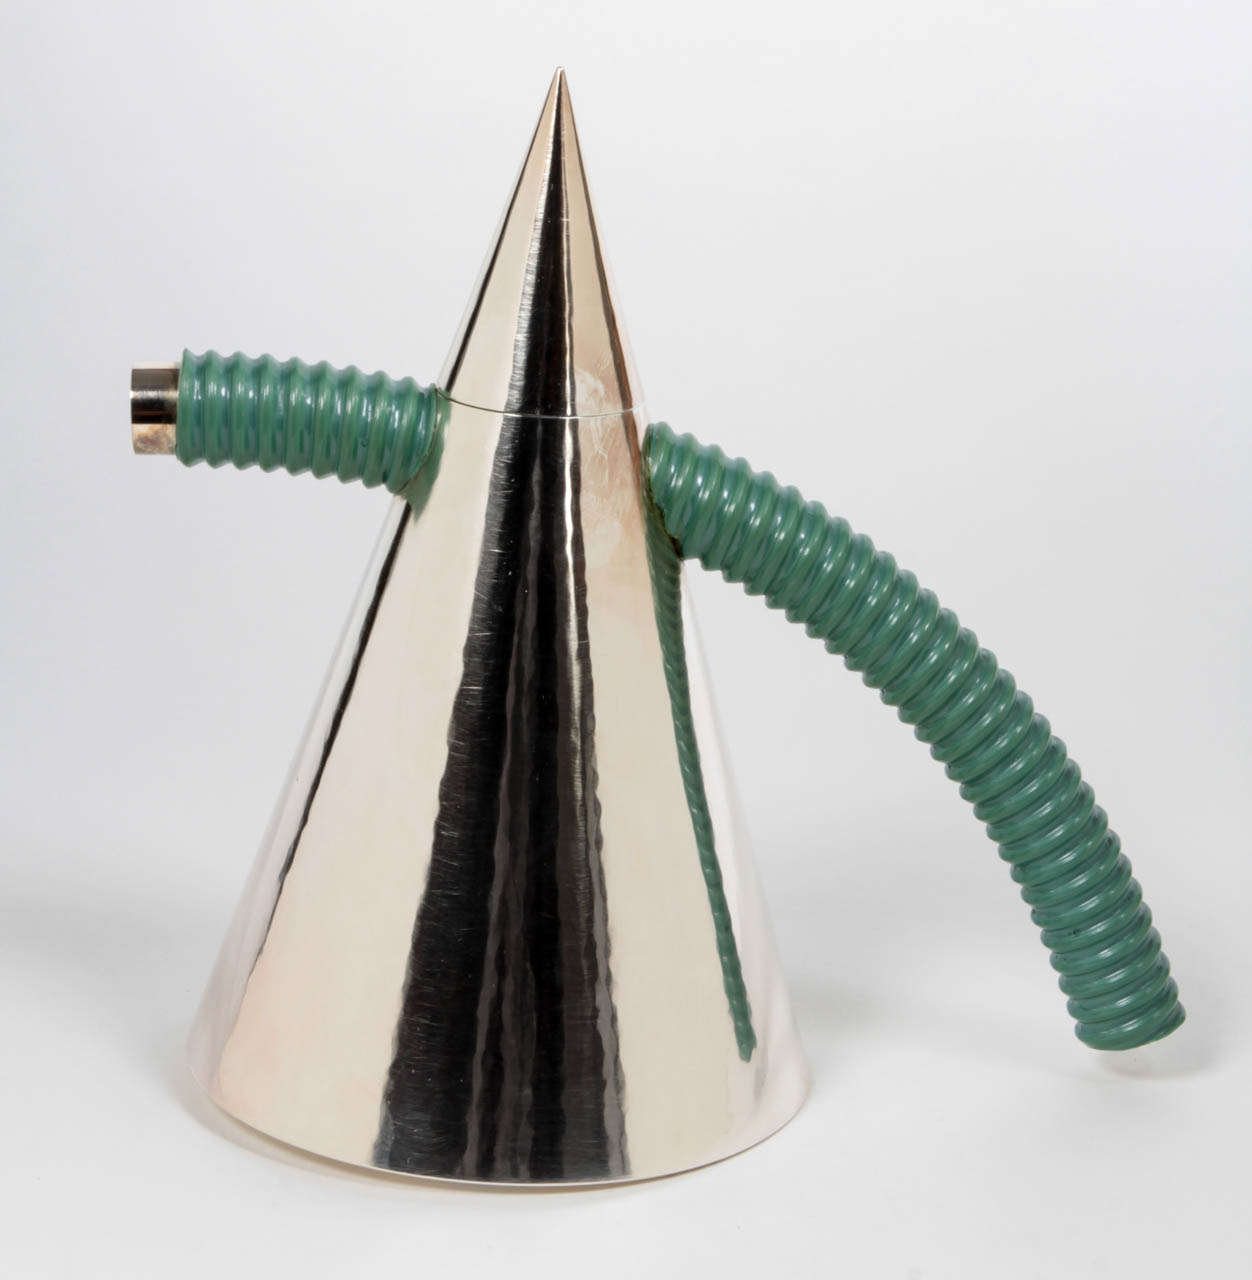 WOLFGANG GESSL (b. 1949)  Austria / Sweden

Covered pitcher   1996 (designed 1995)

Hand wrought and hand hammered silver cone shaped covered pitcher form with a green PVC handle and spout over silver cylindrical arching forms

Marks: Wolfgang